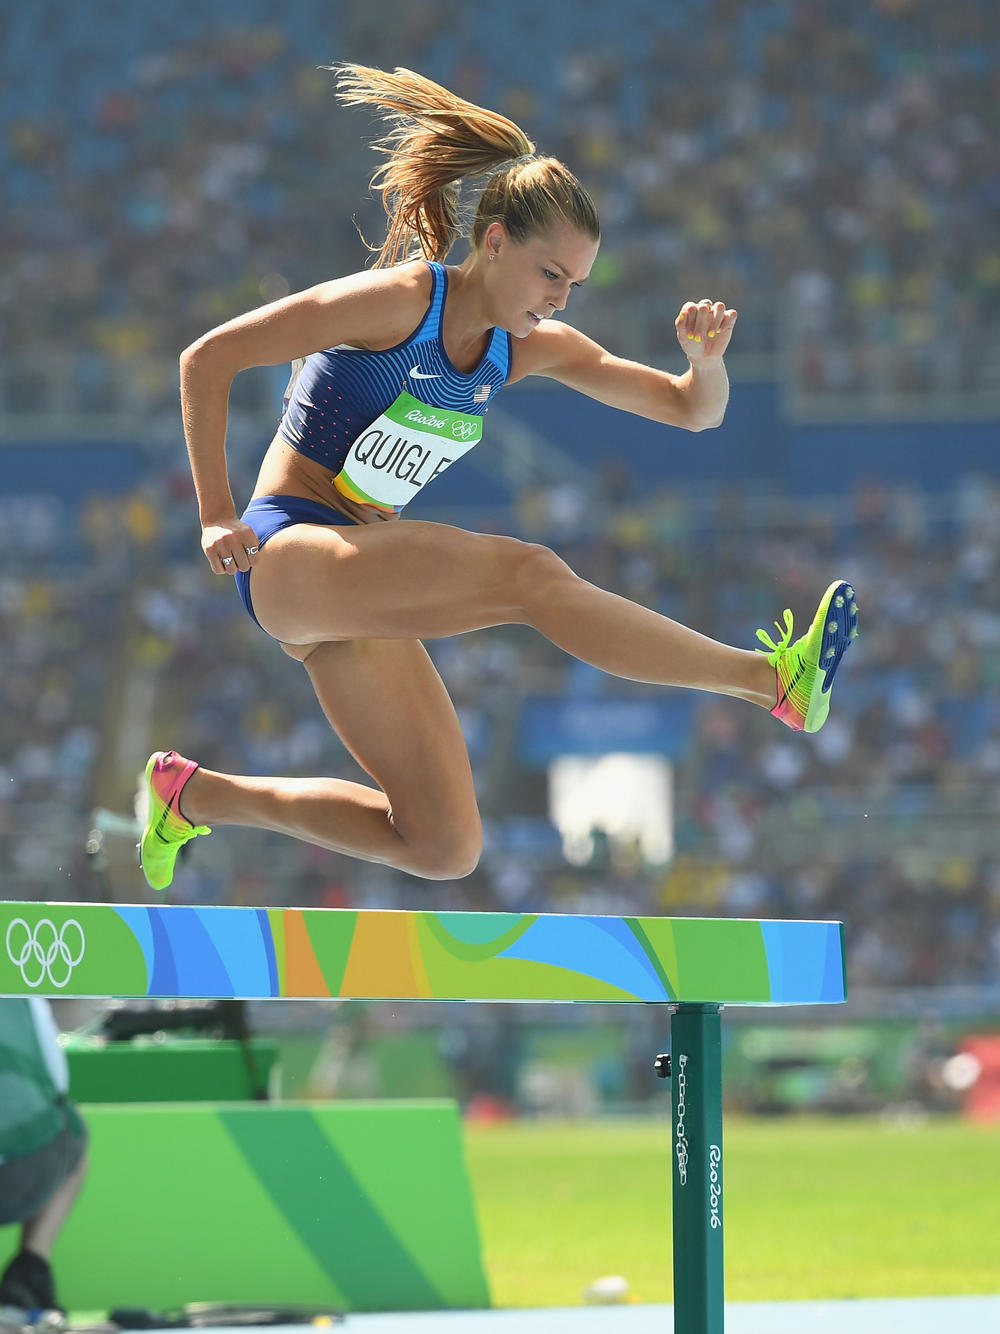 Colleen Quigley made her Olympic debut at the Rio de Janeiro Games in 2016. She finished eighth in the 3000m Steeplechase Final.